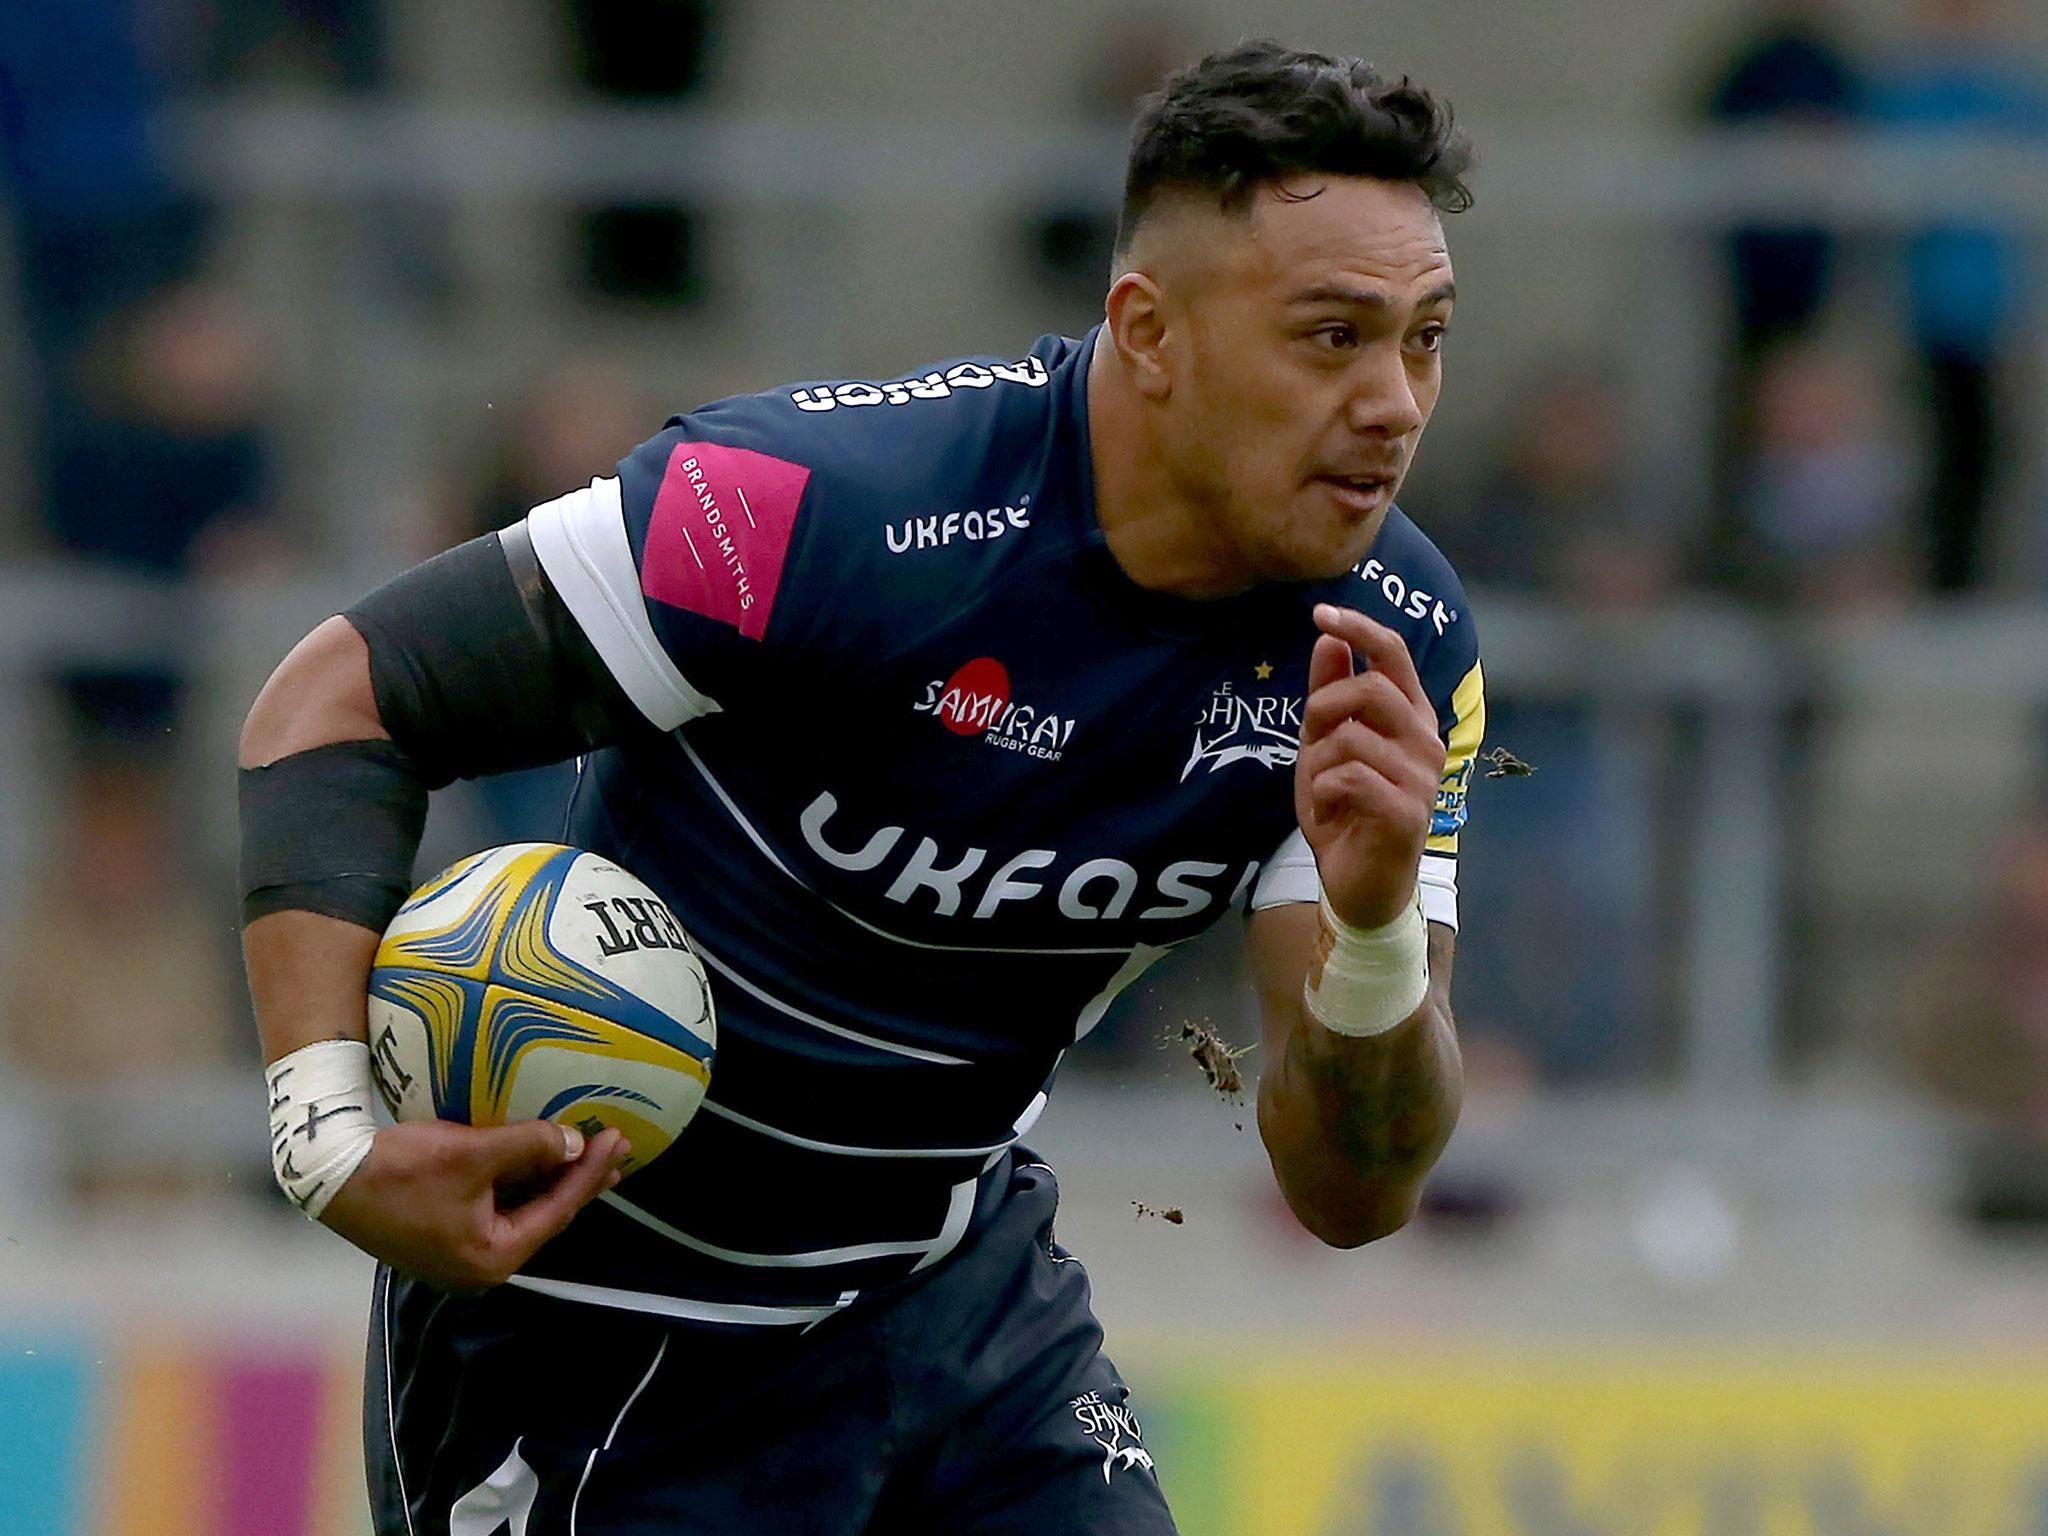 New Zealand born winger Denny Solomona was recently called up by England